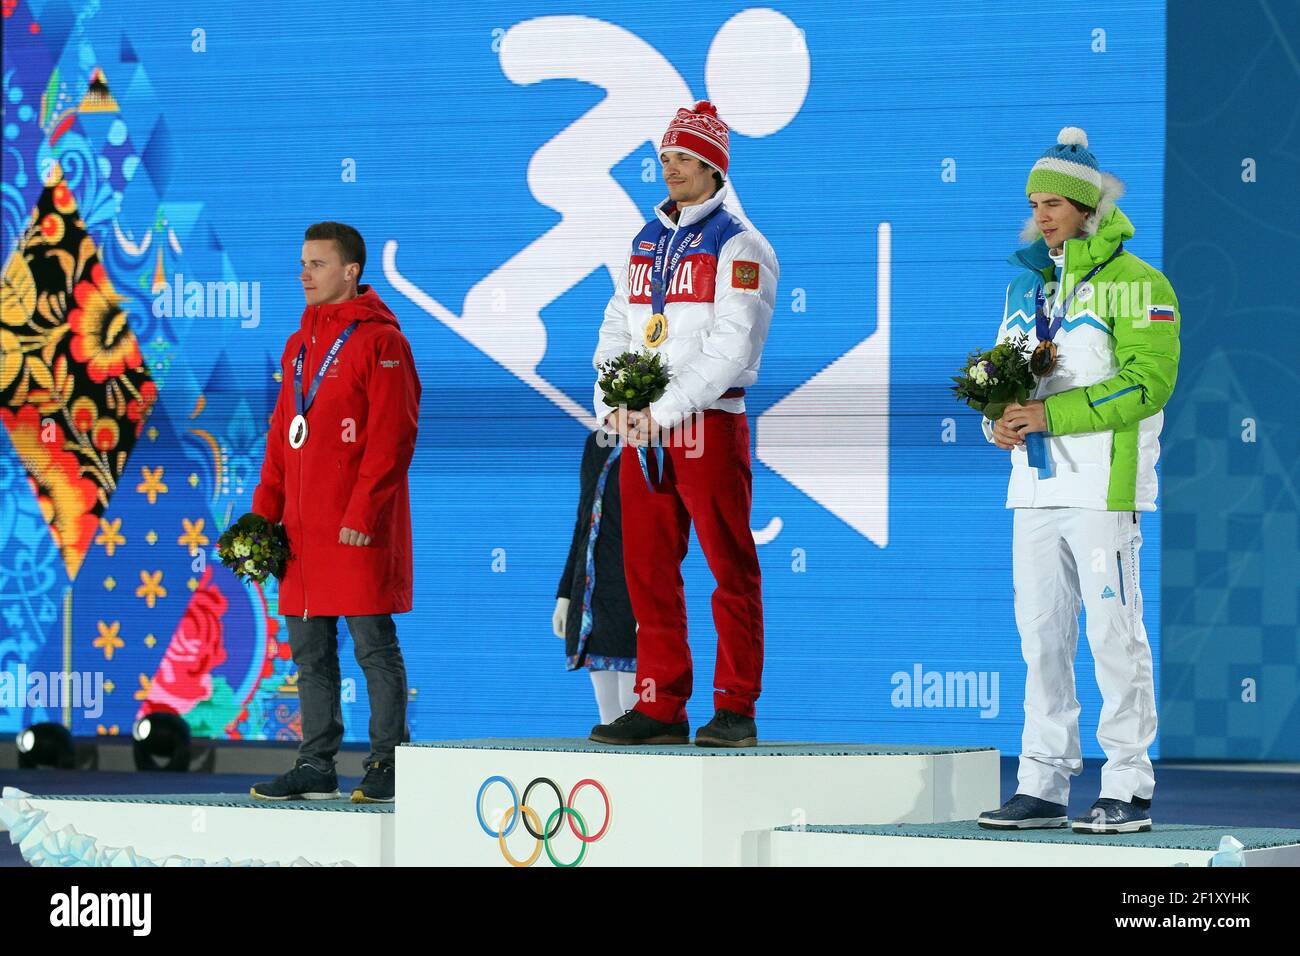 Snowboard Mens' Parallel Giant Slalom Podium, Nevi Galmarini from Switzerland, silver medal, Vic Wild from Russia , gold medal and Zan Kosir from Slovenia, bronze medal, at the place medals during the XXII Winter Olympic Games Sotchi 2014, day 12, on February 19, 2014 in Sochi, Russia. Photo Pool KMSP / DPPI Stock Photo